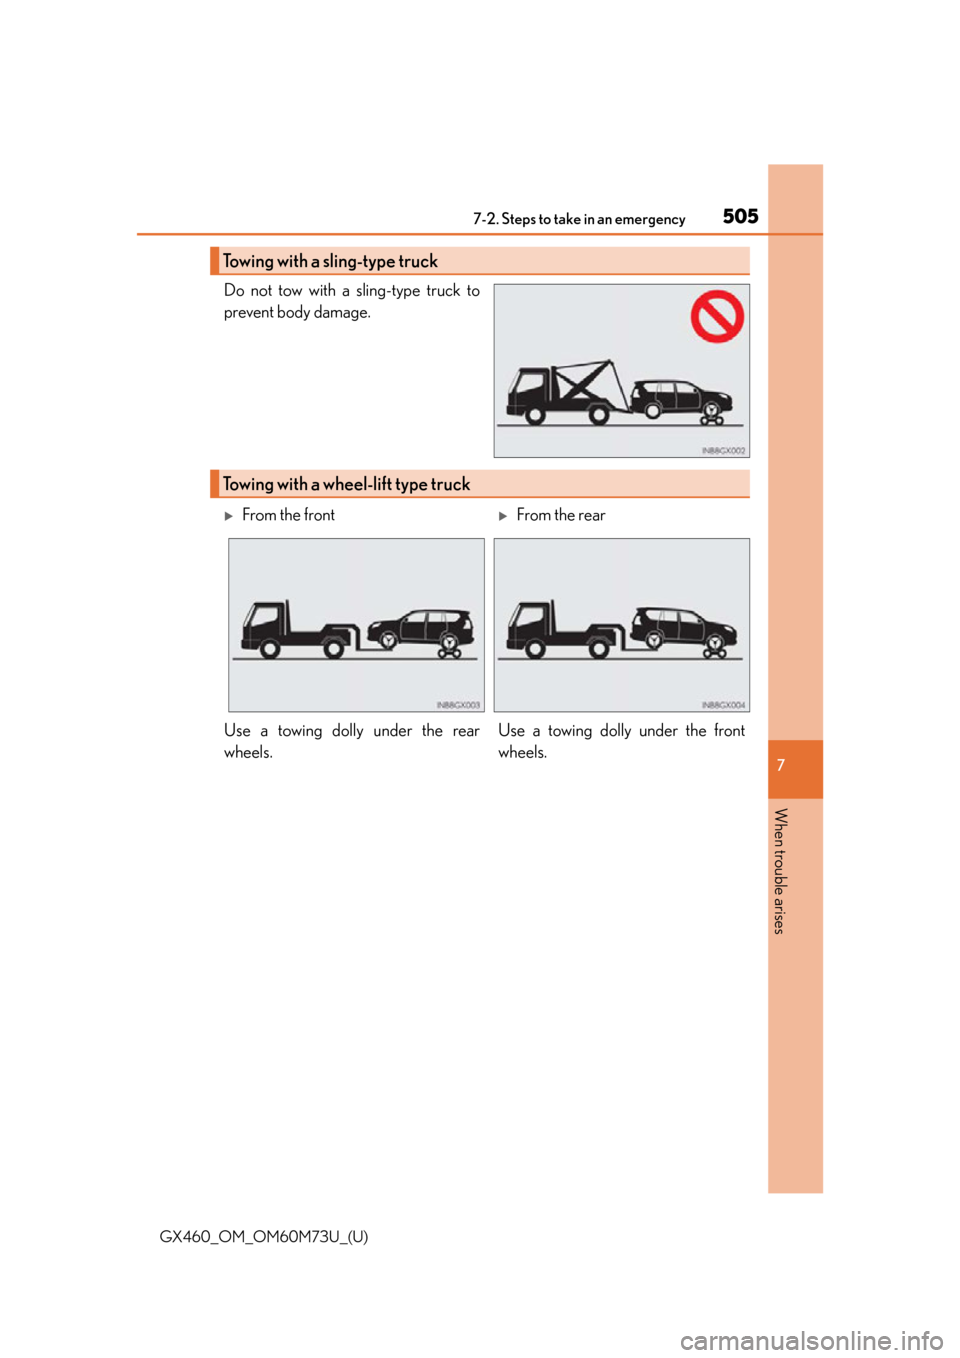 Lexus GX460 2016  Multimedia Manual / LEXUS 2016 GX460 OWNERS MANUAL (OM60M73U) 5057-2. Steps to take in an emergency
GX460_OM_OM60M73U_(U)
7
When trouble arises
Do not tow with a sling-type truck to
prevent body damage.
Towing with a sling-type truck
Towing with a wheel-lift typ